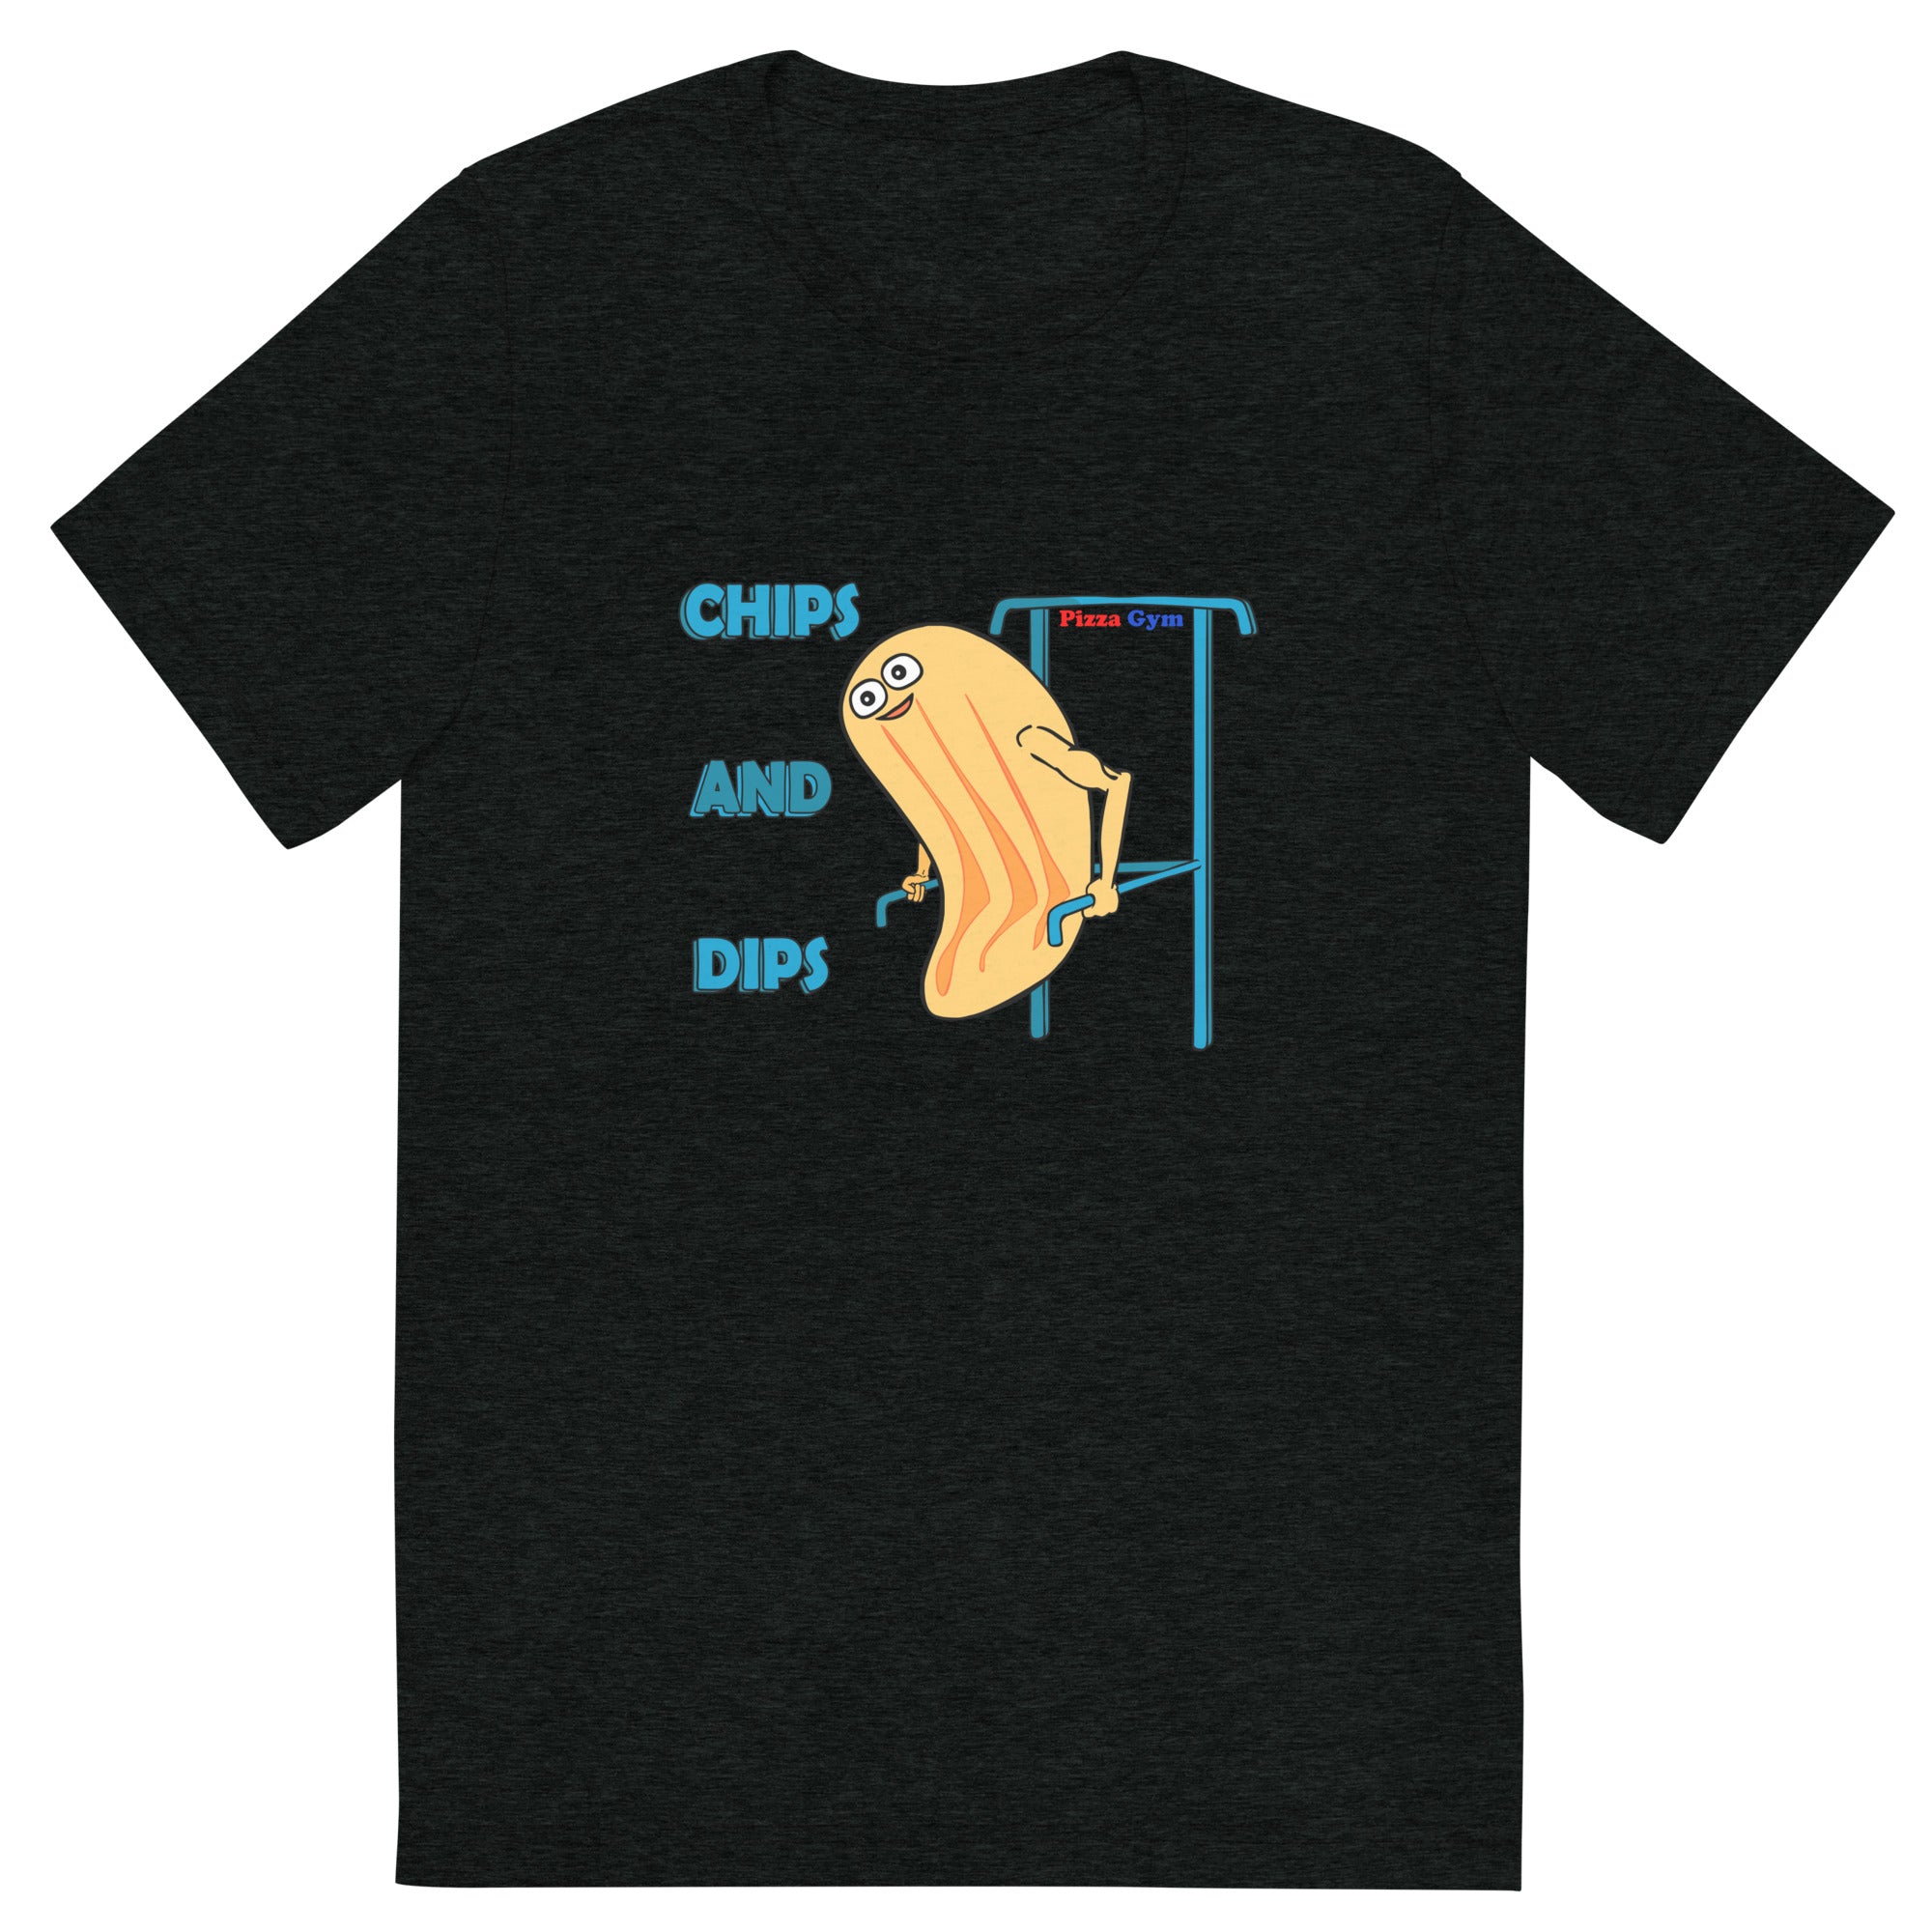 Chips And Dips (Original)